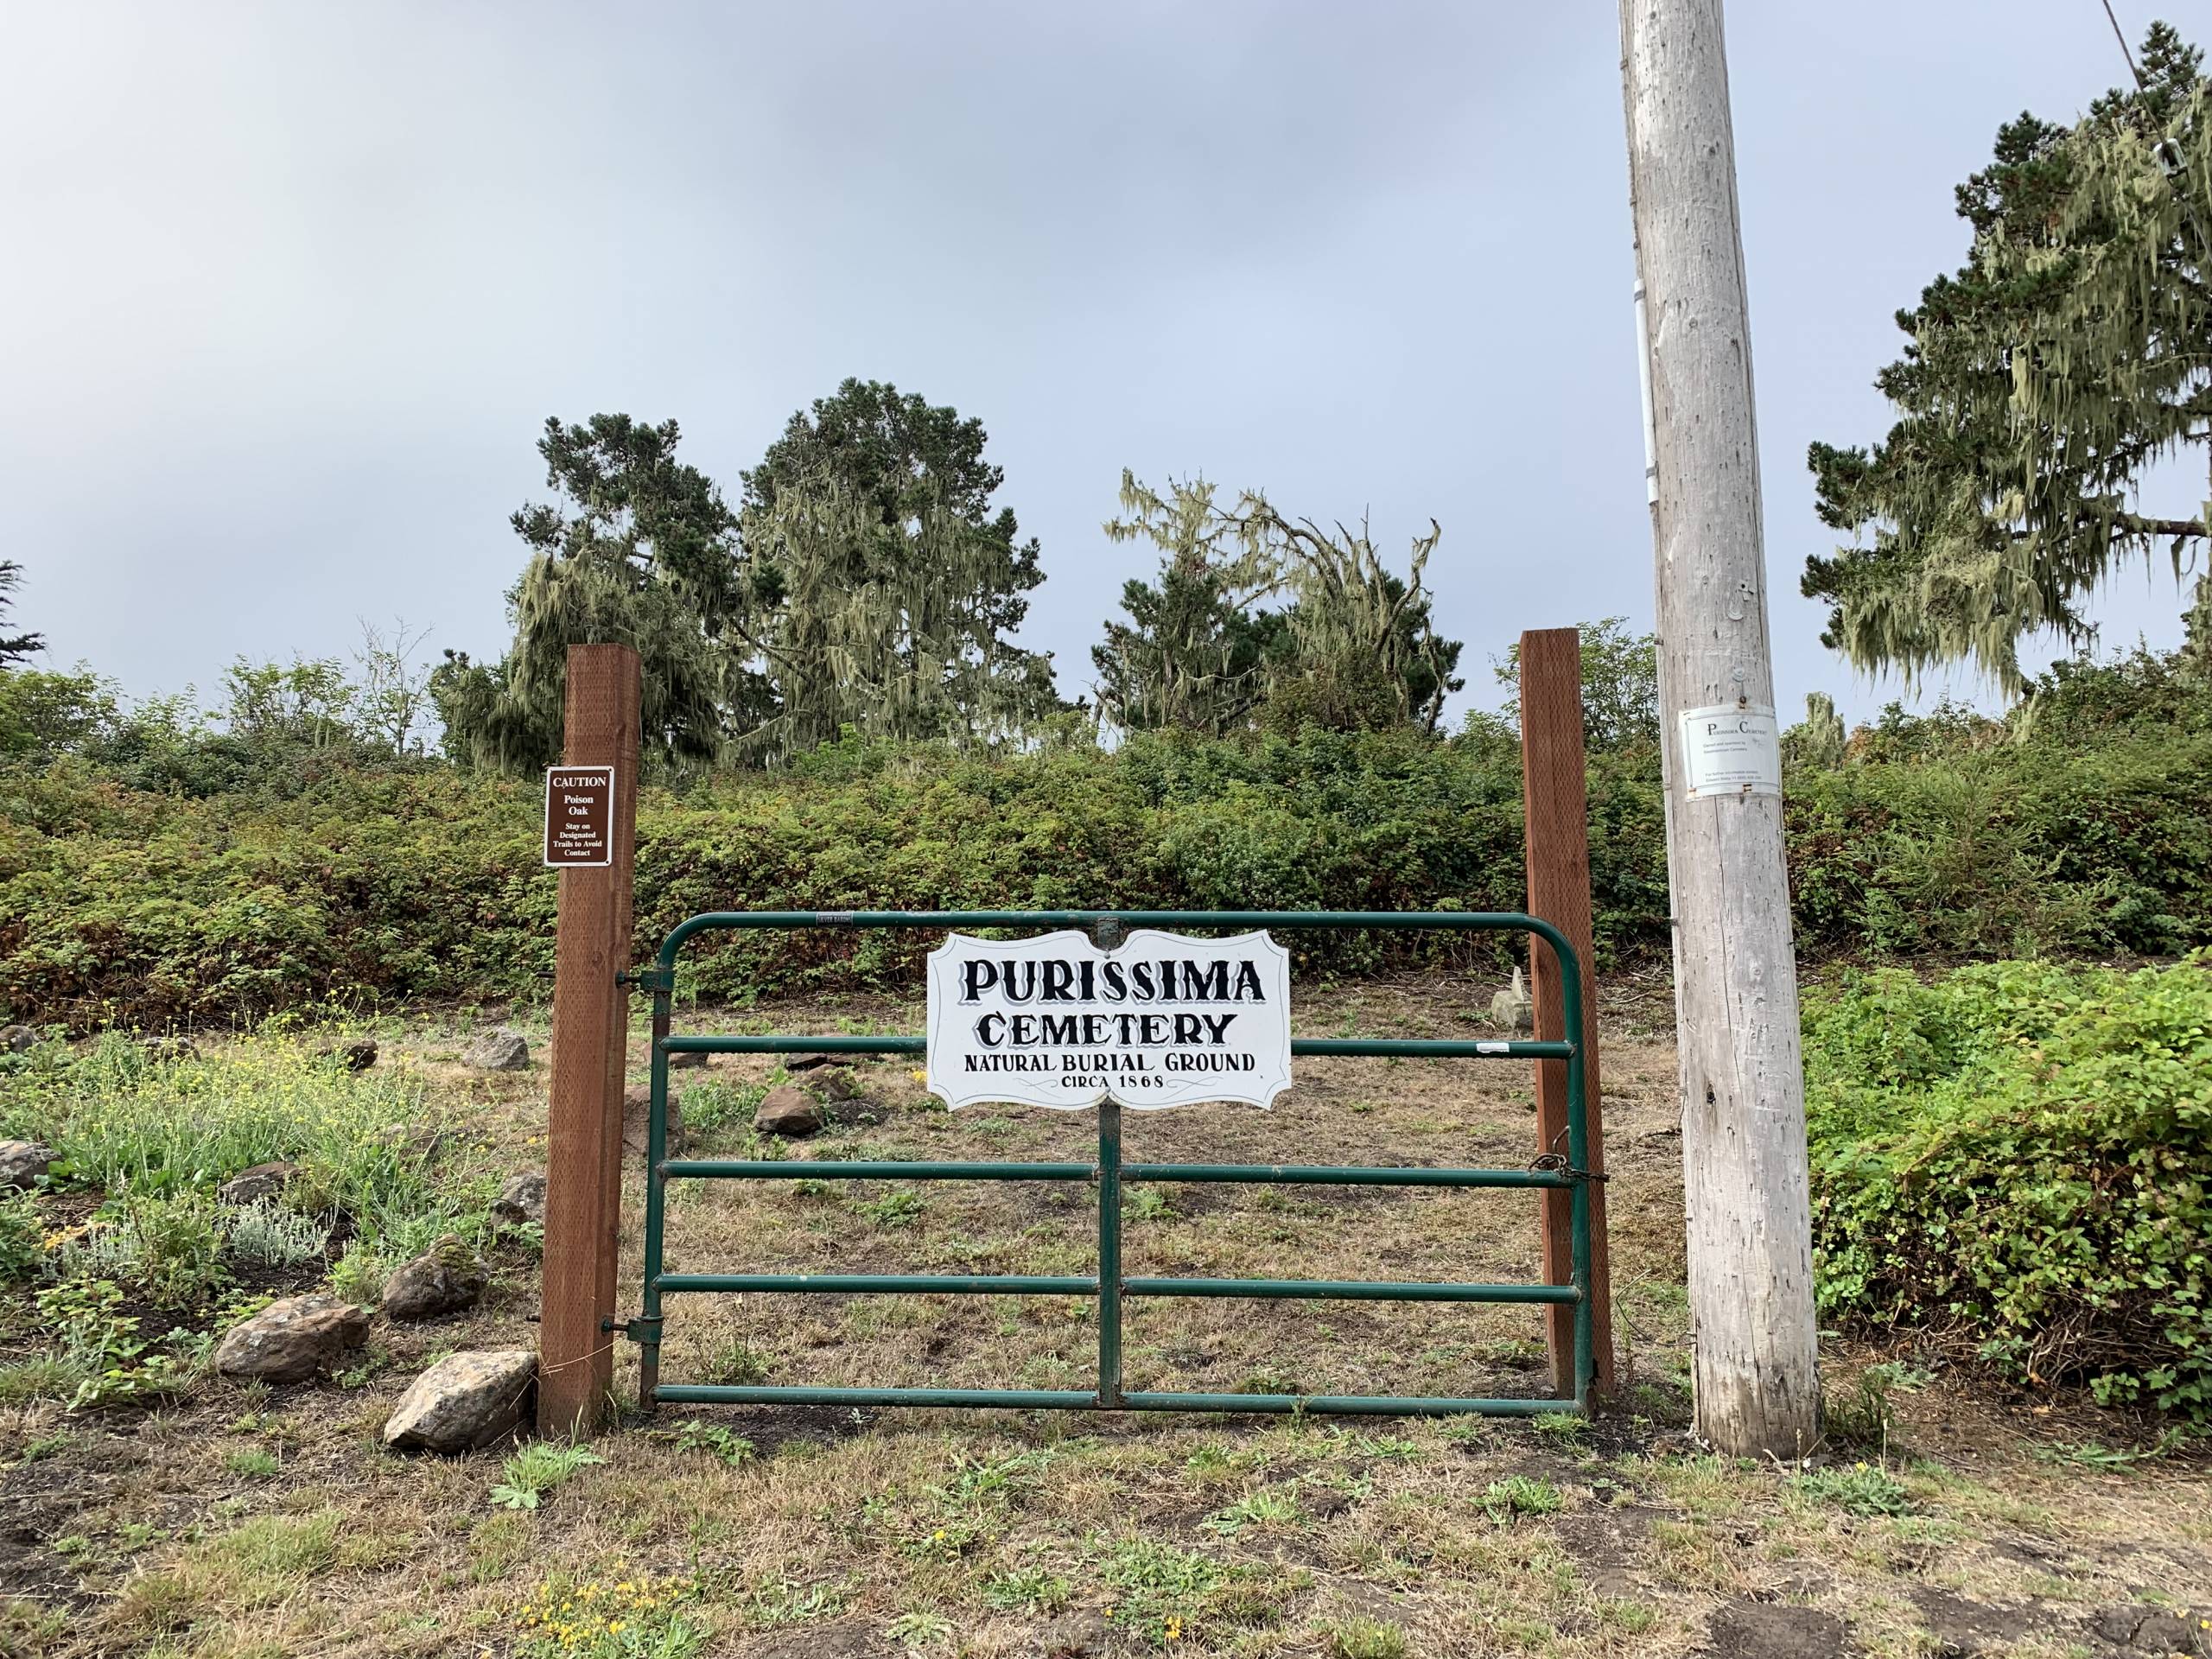 A small sign that says "Purissima Cemetery" sits on a free-standing gate amidst hedgerows of poison oak.